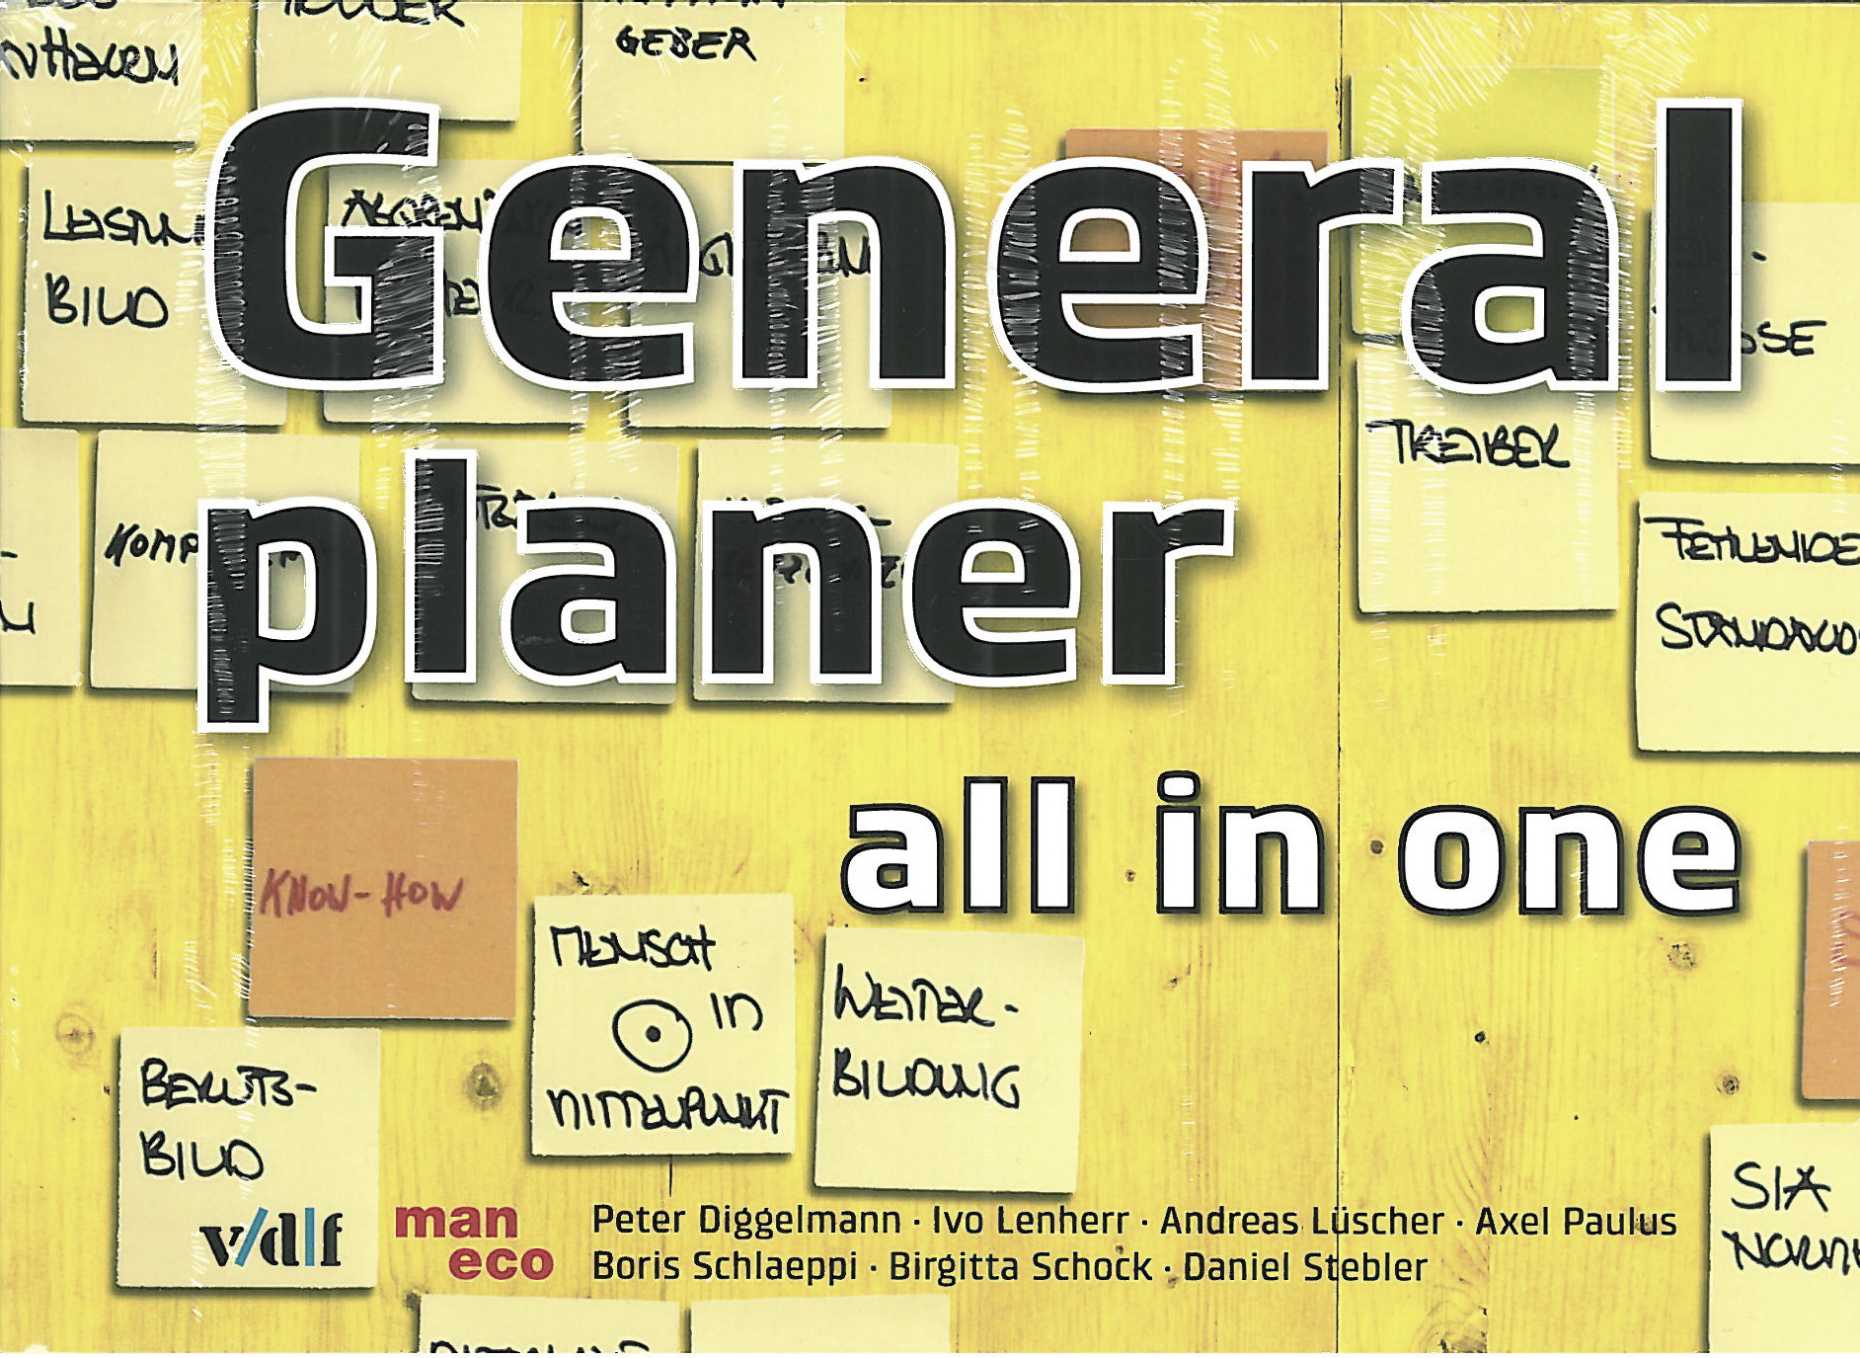 Enlarged view: Generalplaner all in one